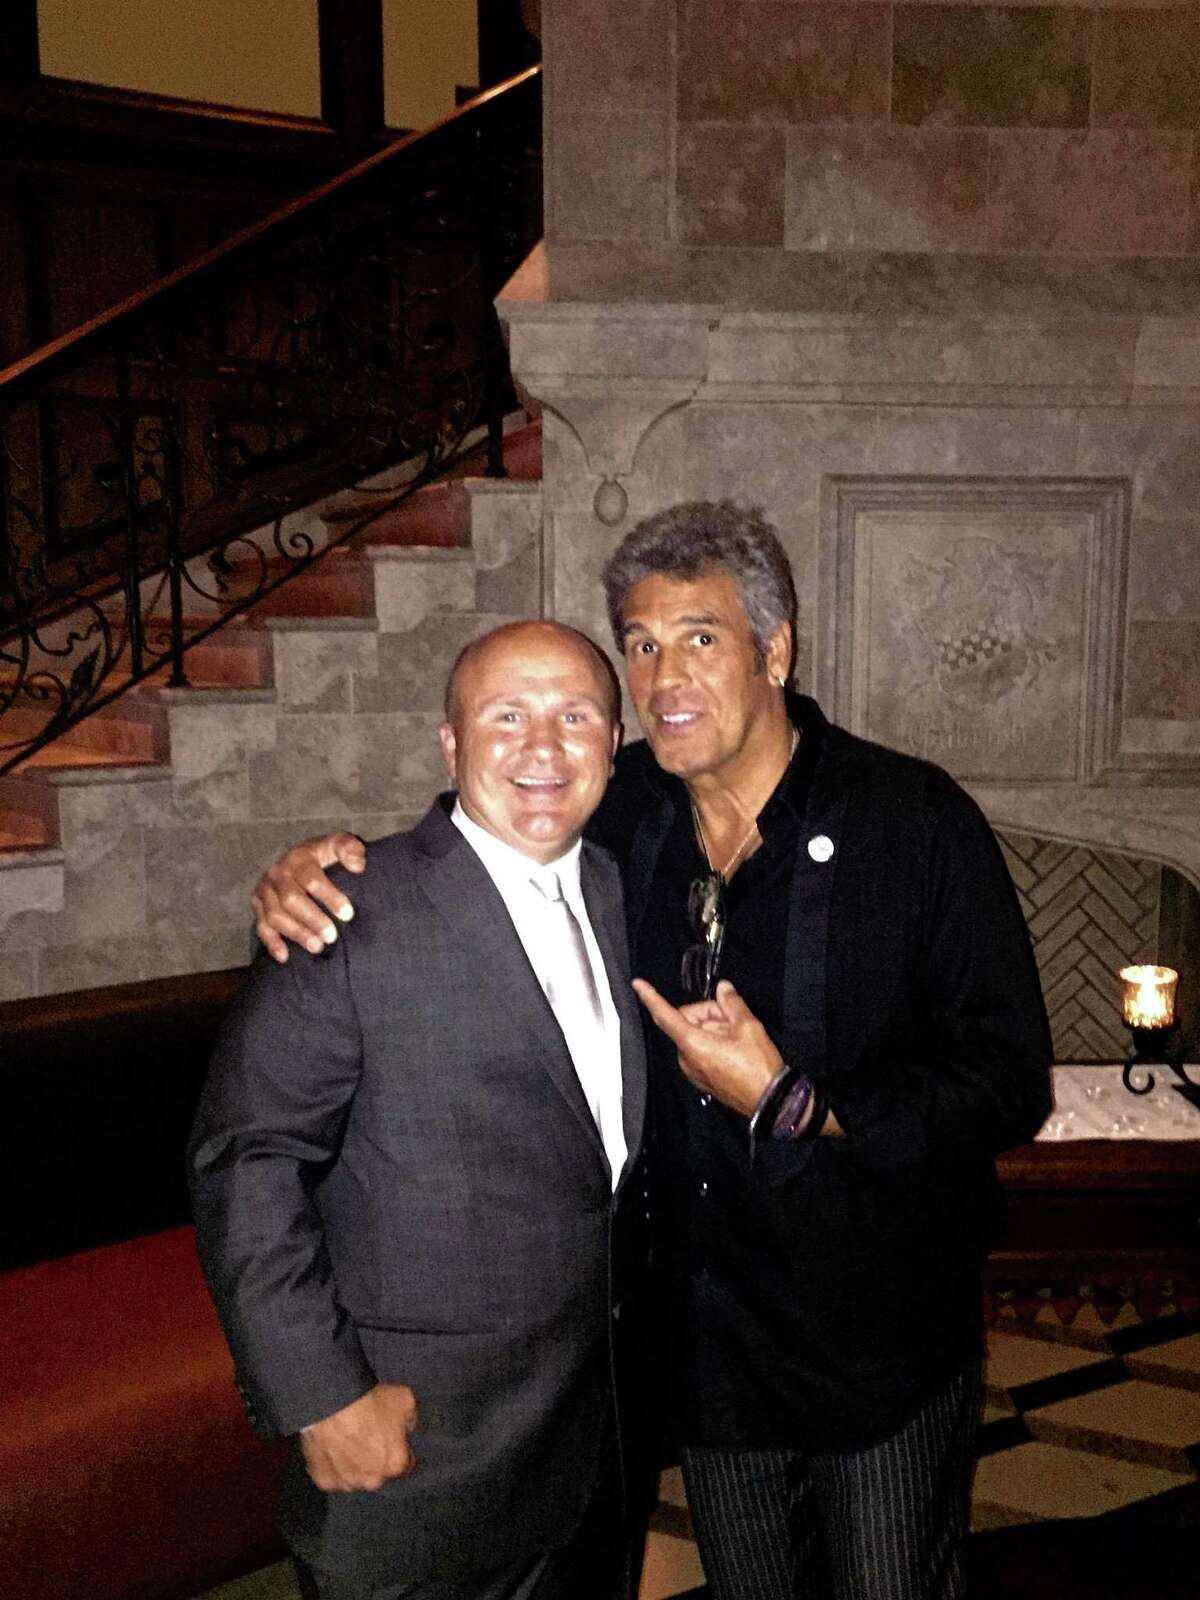 Tony Capasso, maitre'd and managing partner of Gabriele's with saxophonist Mark Rivera at Gabriele's on Tuesday evening.